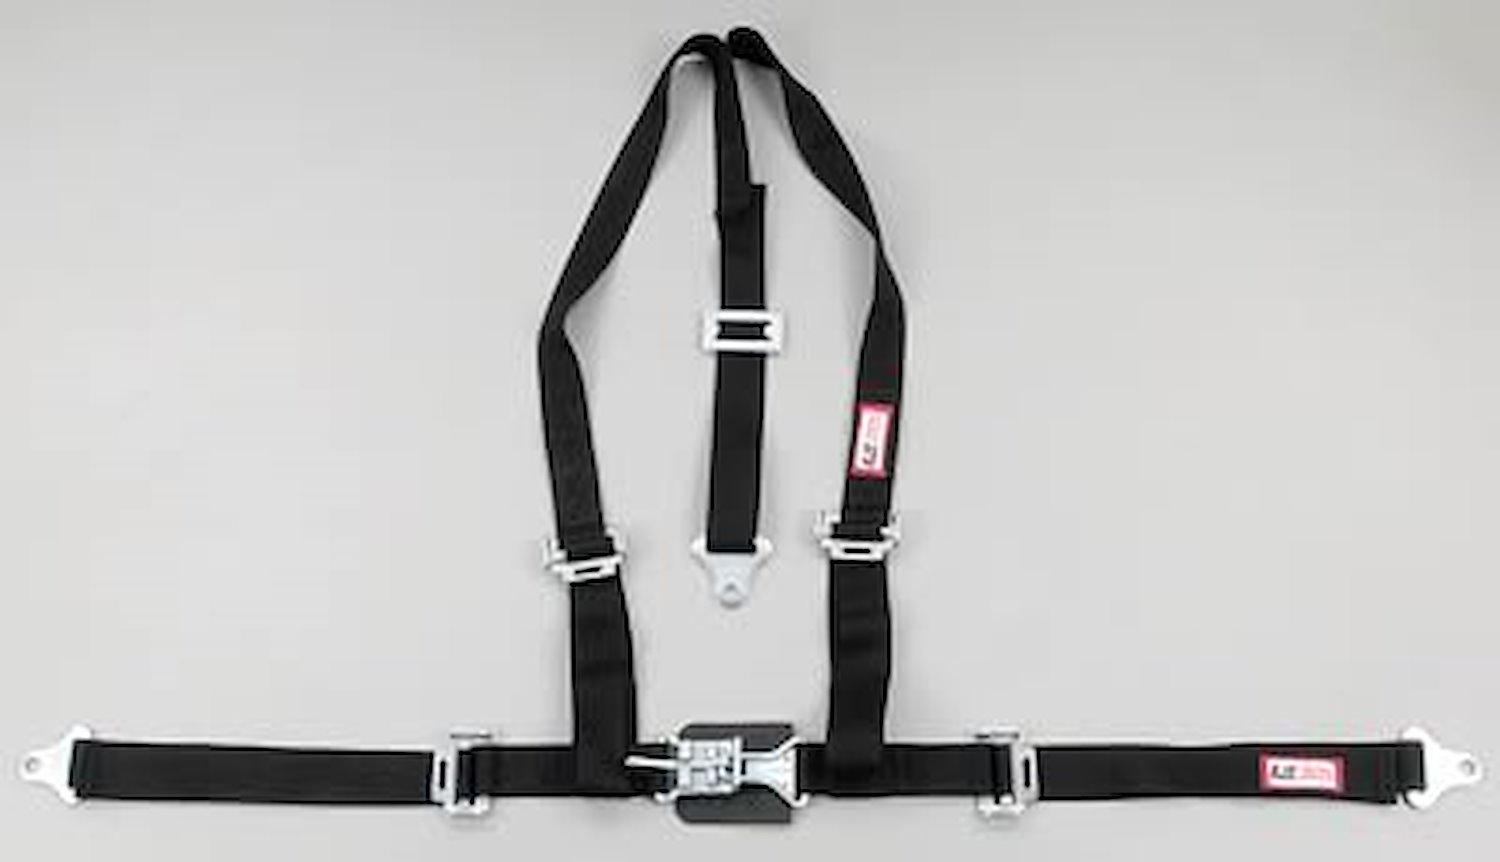 NON-SFI L&L HARNESS 3 PULL UP Lap BELT SEWN IN 2 S.H. Y FLOOR Mount w/STERNUM STRAP ALL WRAP ENDS PURPLE